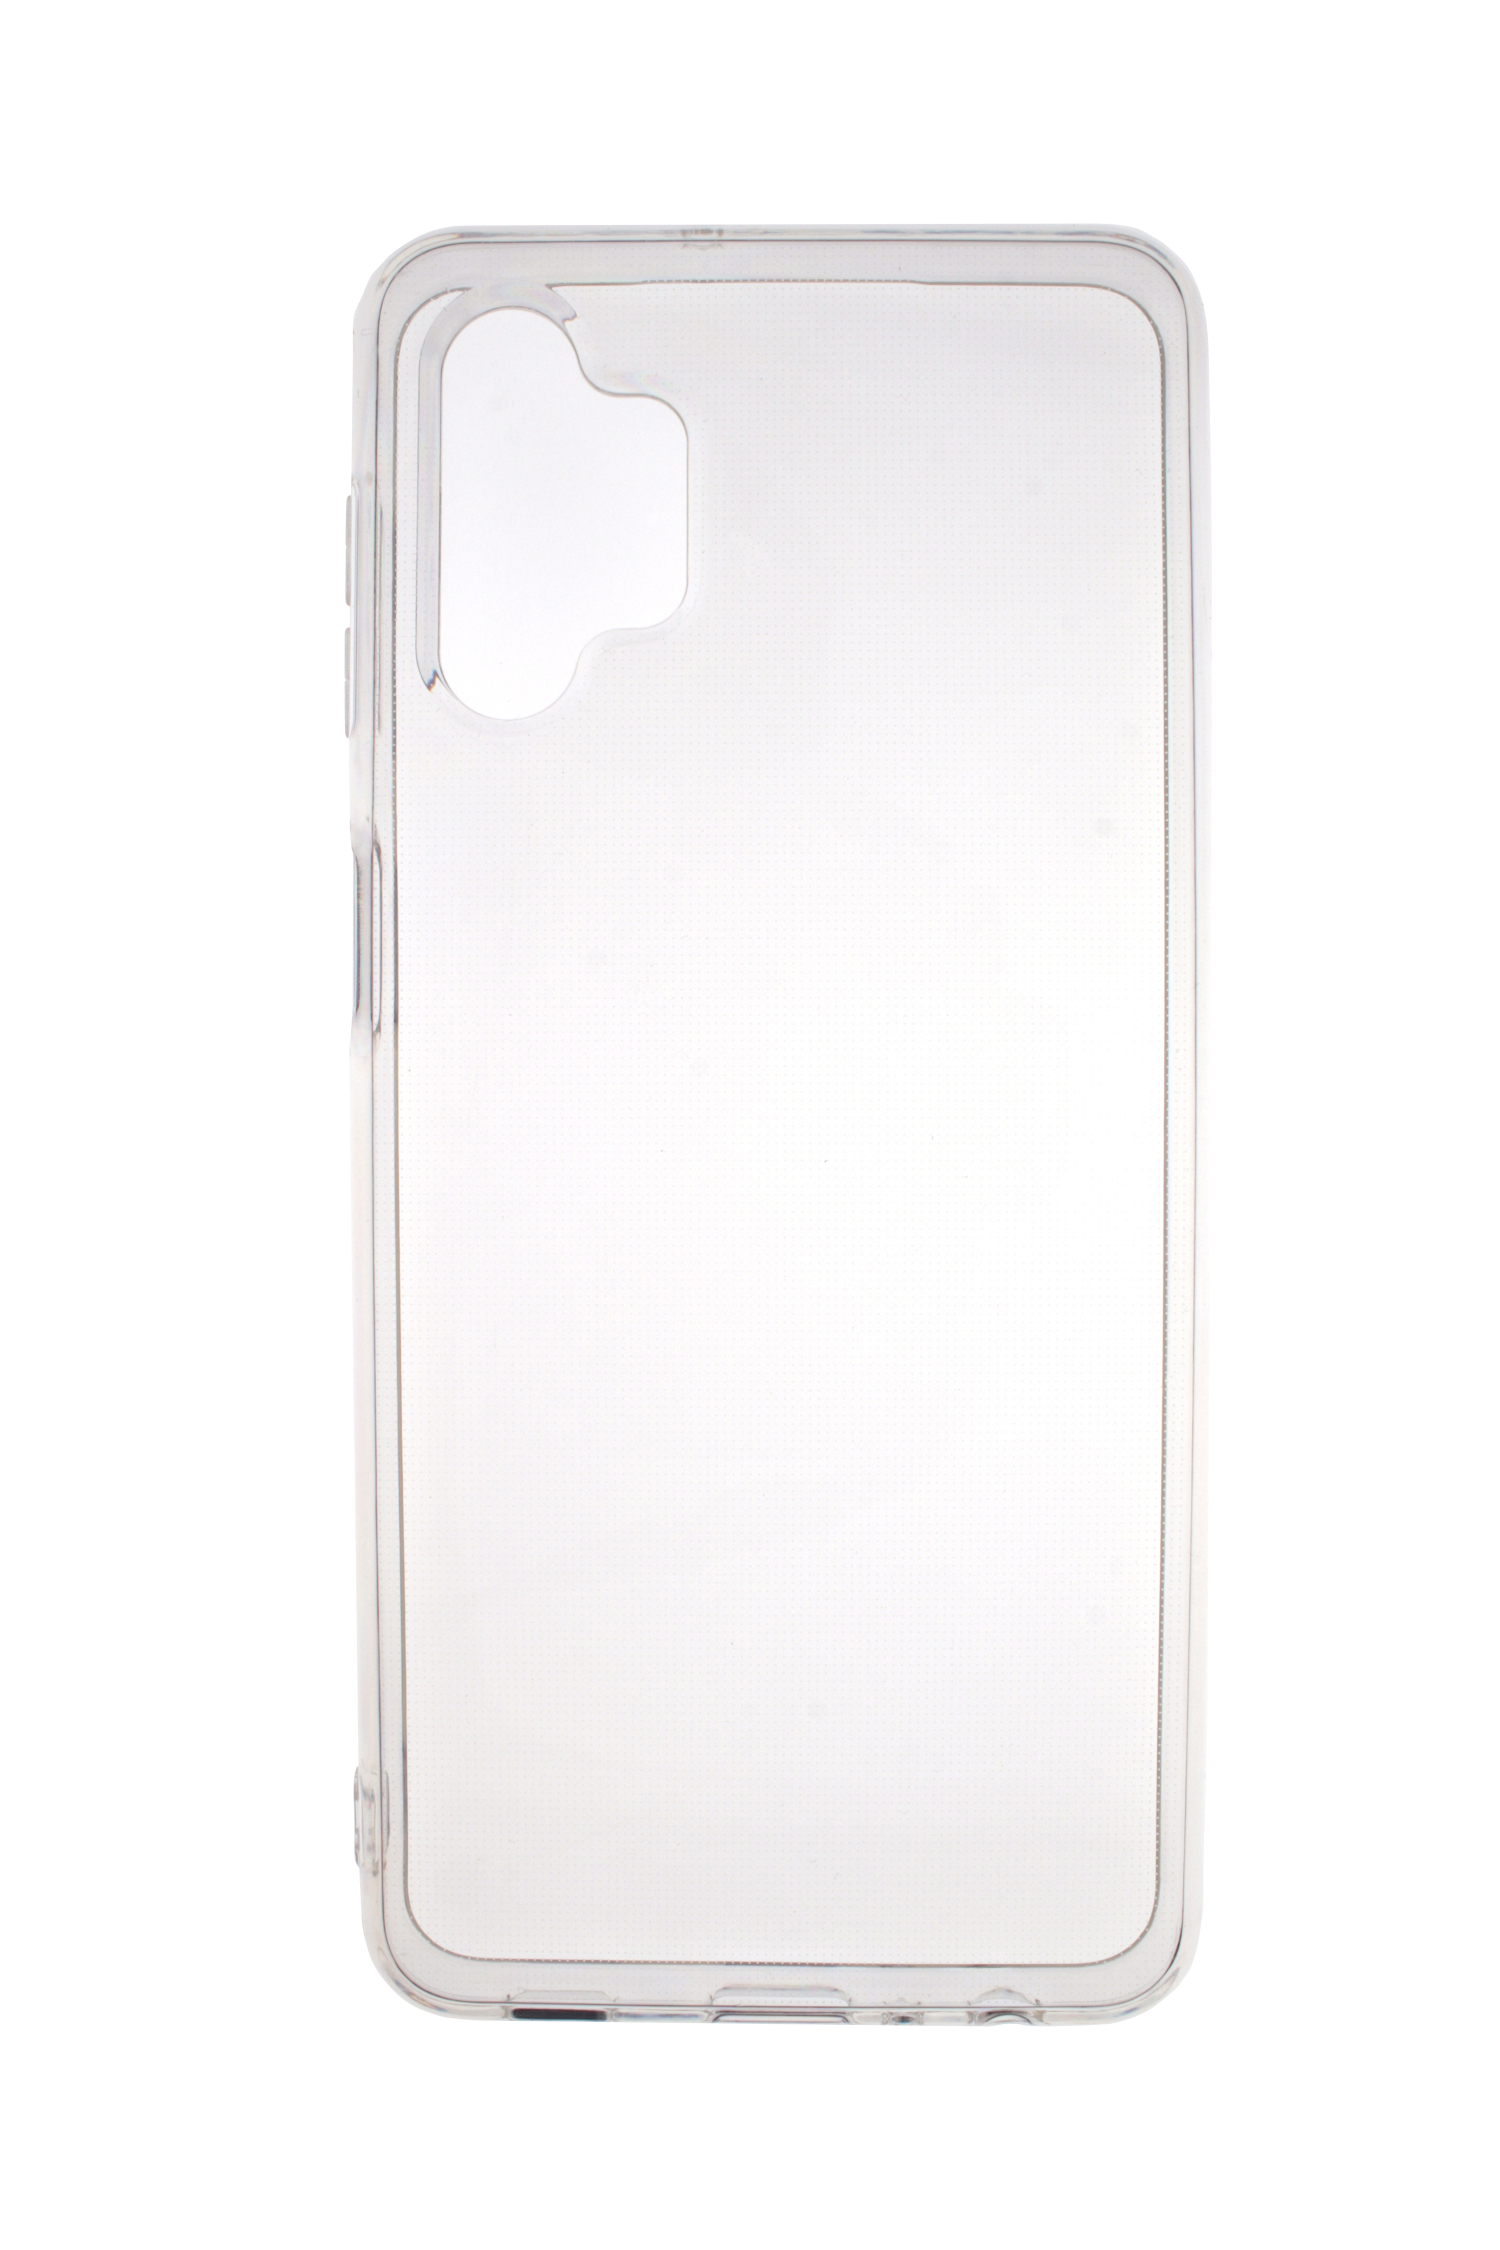 TPU Case JAMCOVER Strong, A32 5G, mm Backcover, Samsung, 2.0 Transparent Galaxy